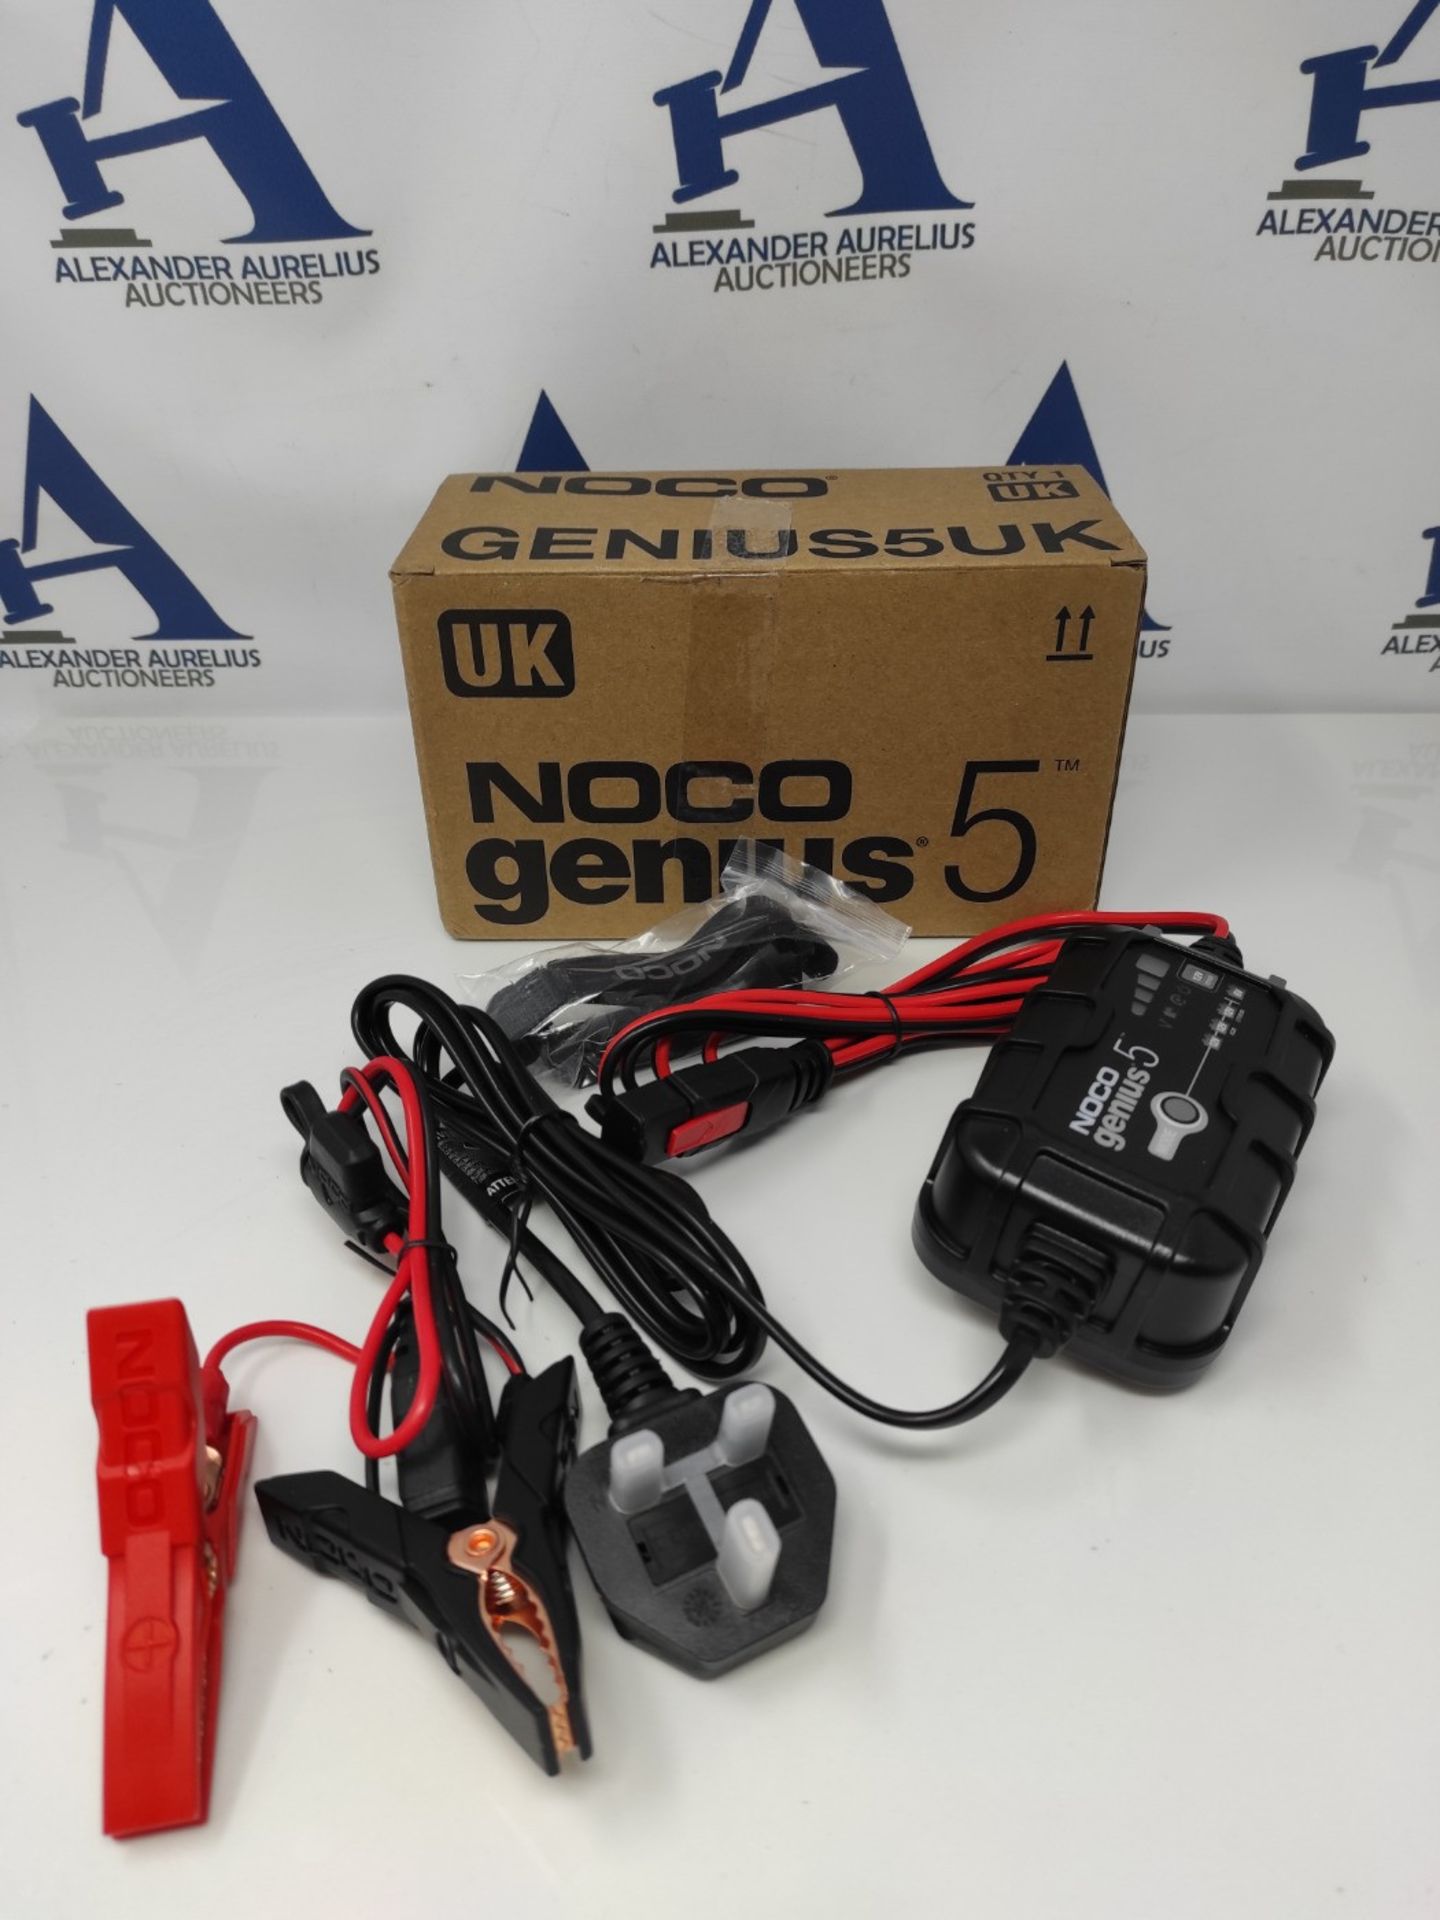 RRP £71.00 NOCO GENIUS5UK, 5A Car Battery Charger, 6V and 12V Portable Smart Charger, Battery Mai - Image 2 of 2